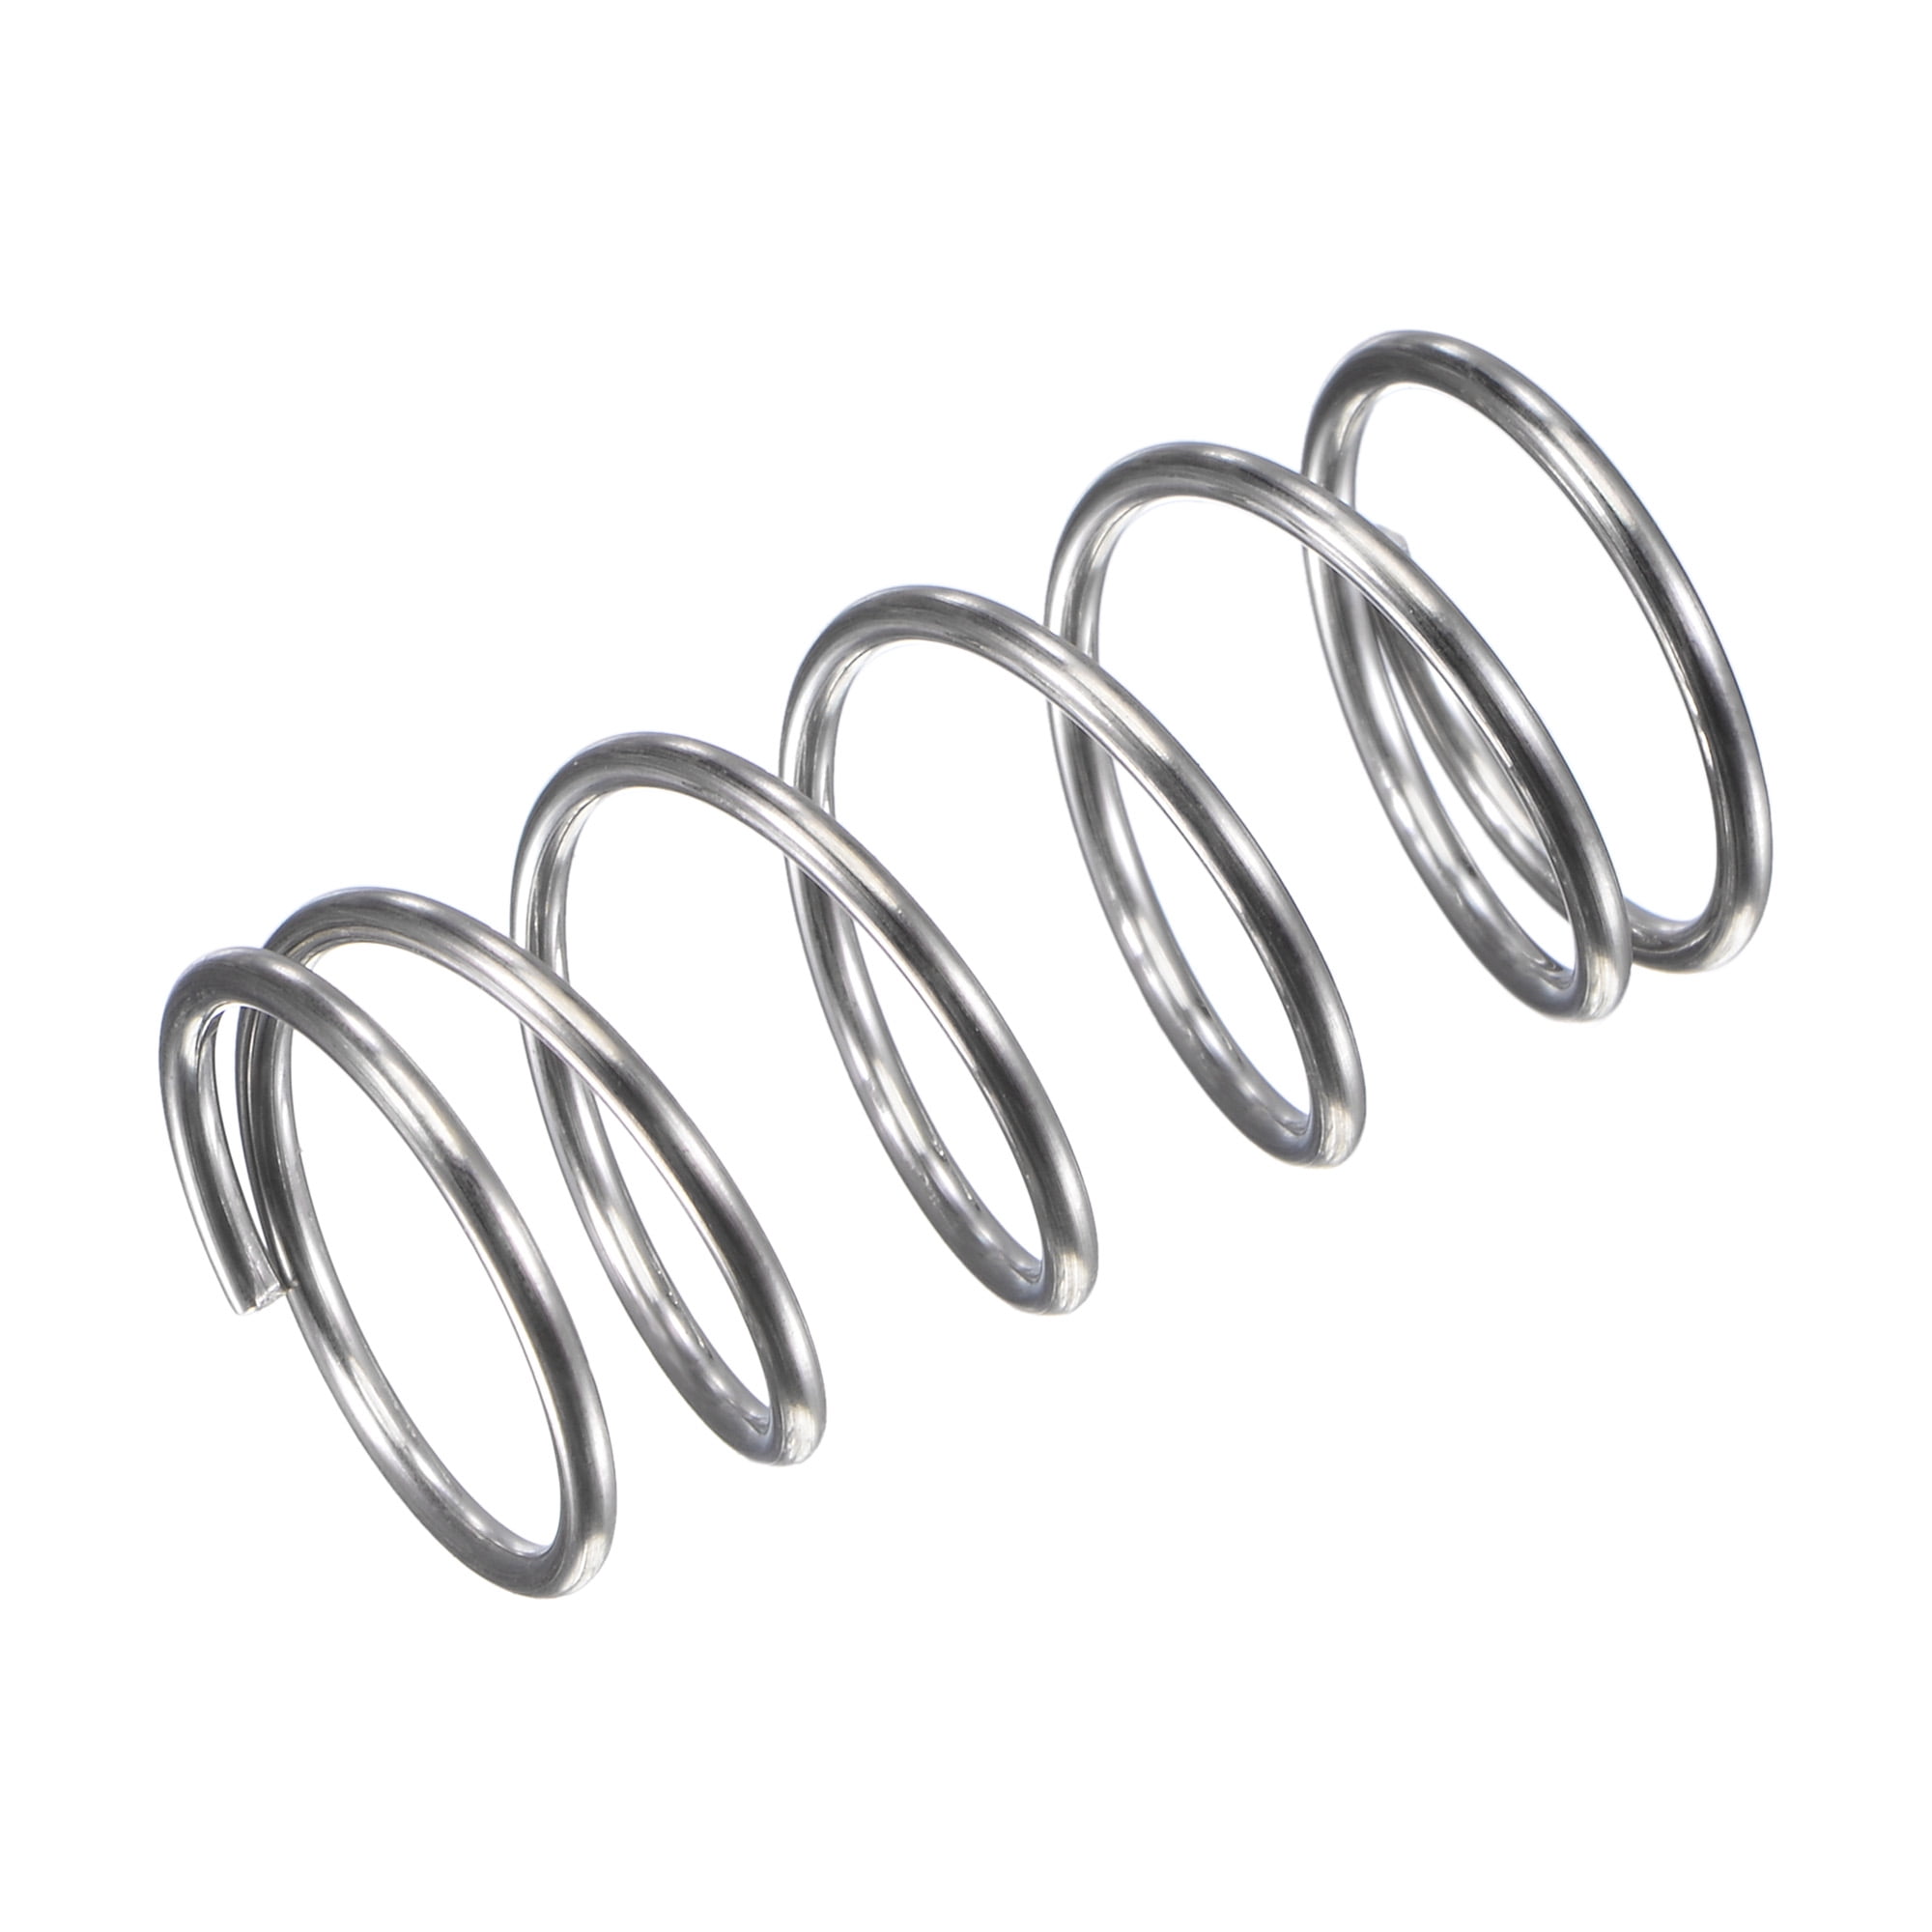 Compression Spring Springs 304 Stainless Steel 305mm Long 3mm-30mm.OD  Anti-rust